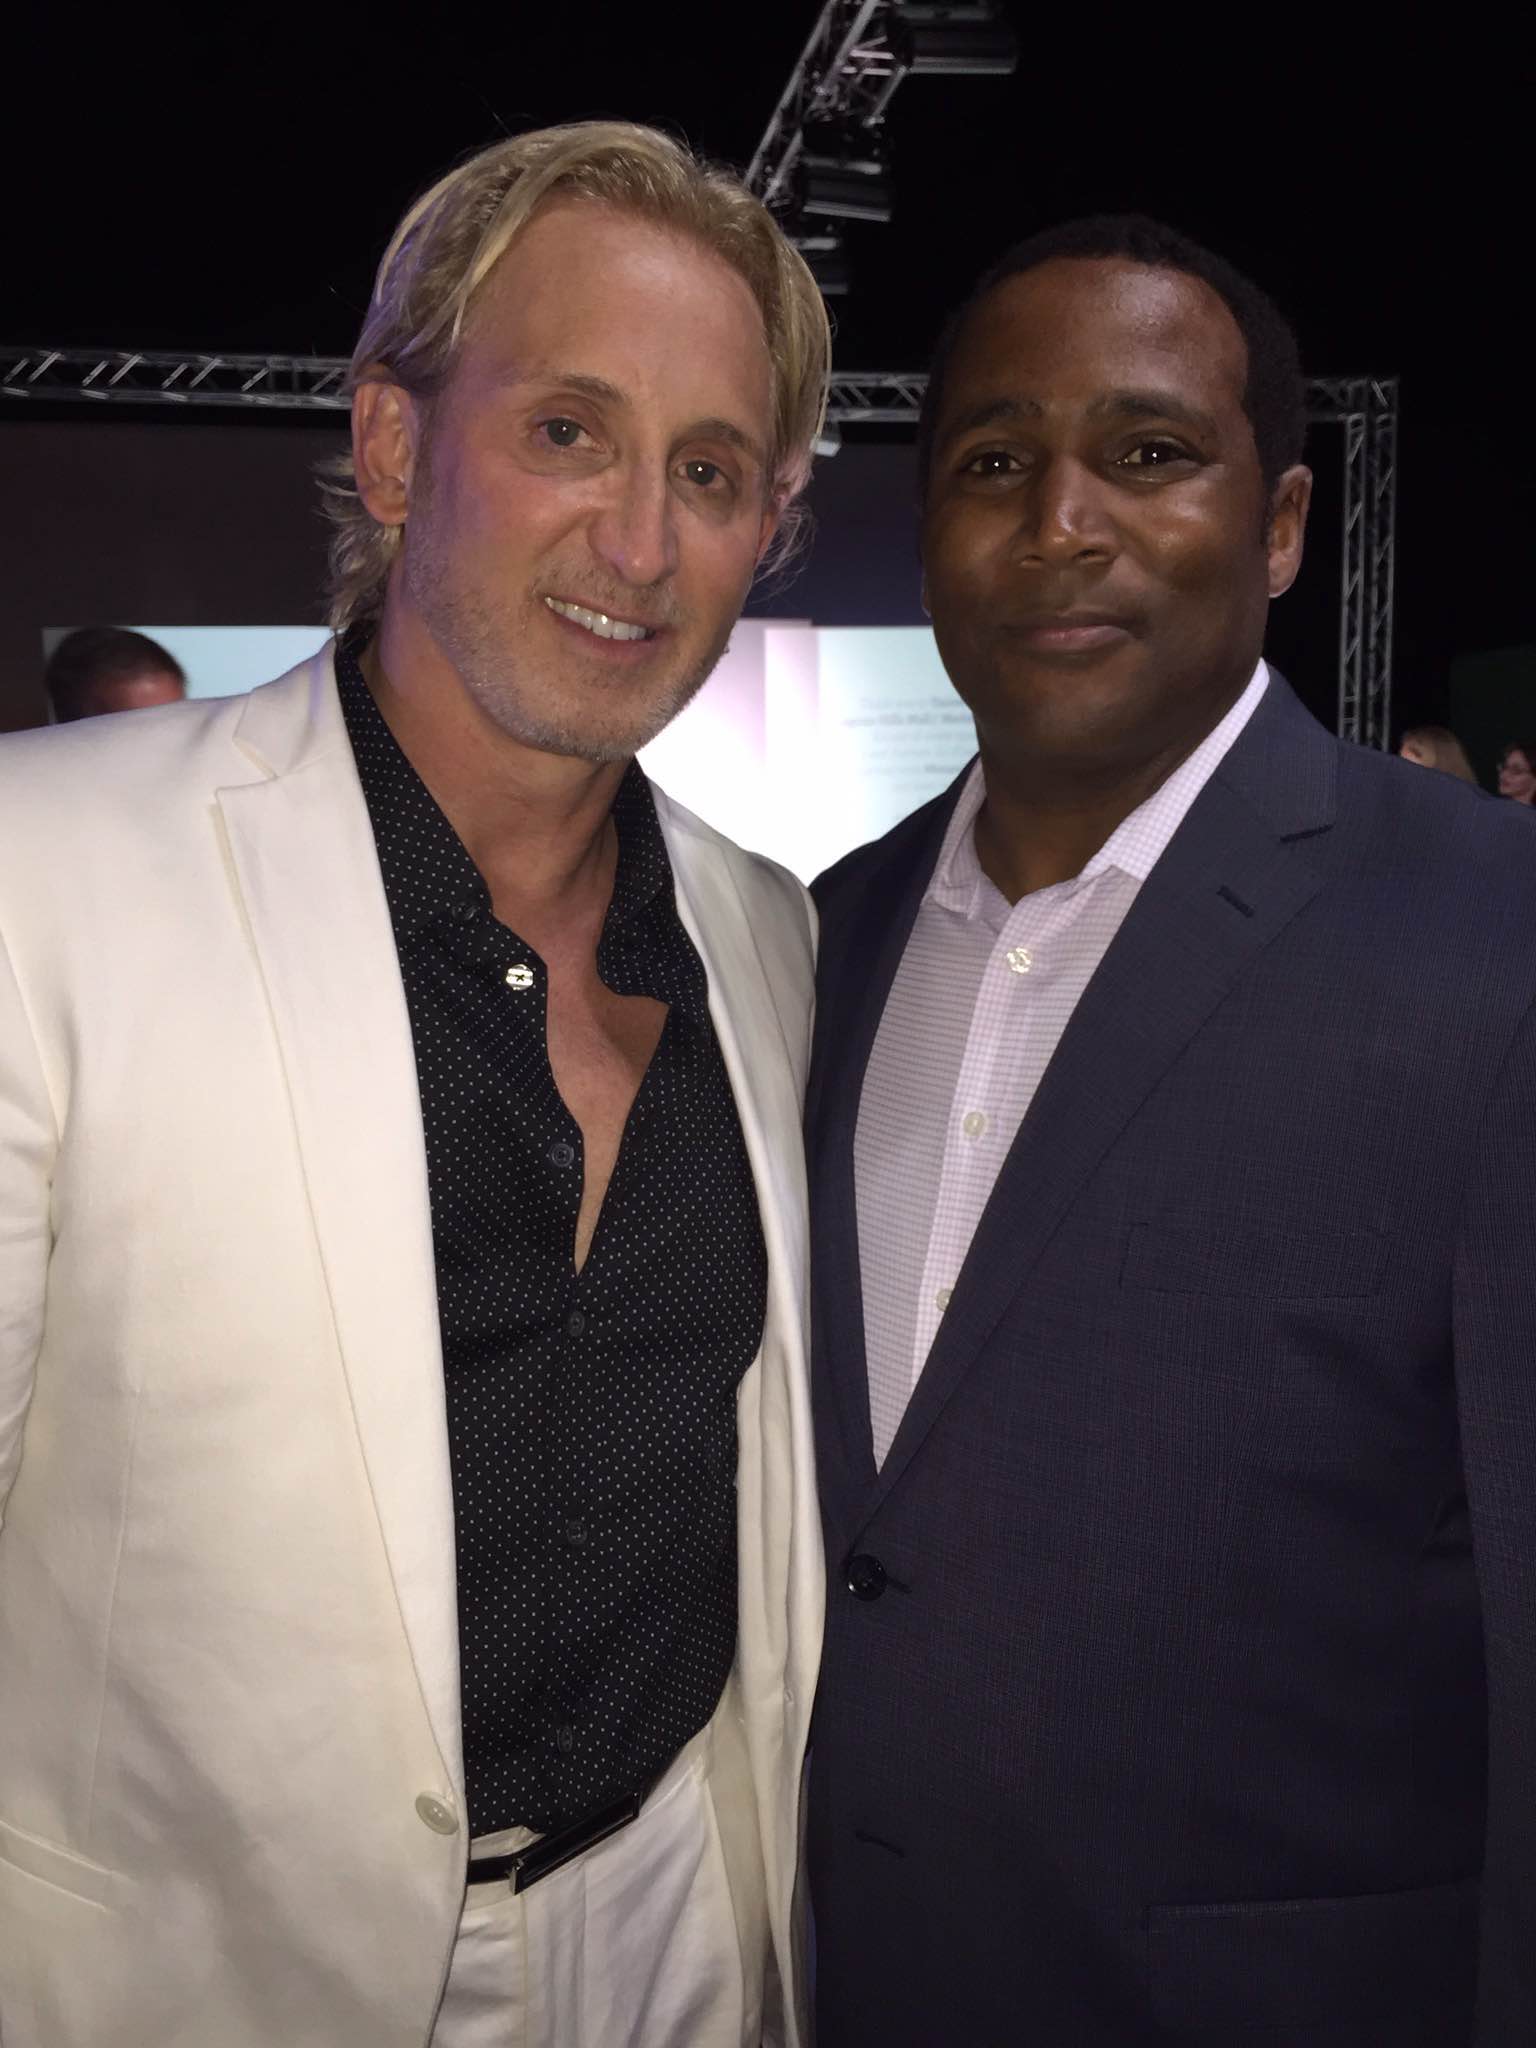 David Meister and Darius Cottrell at Genlux Magazine Fashion Benefit Party and David Meister Runway Show